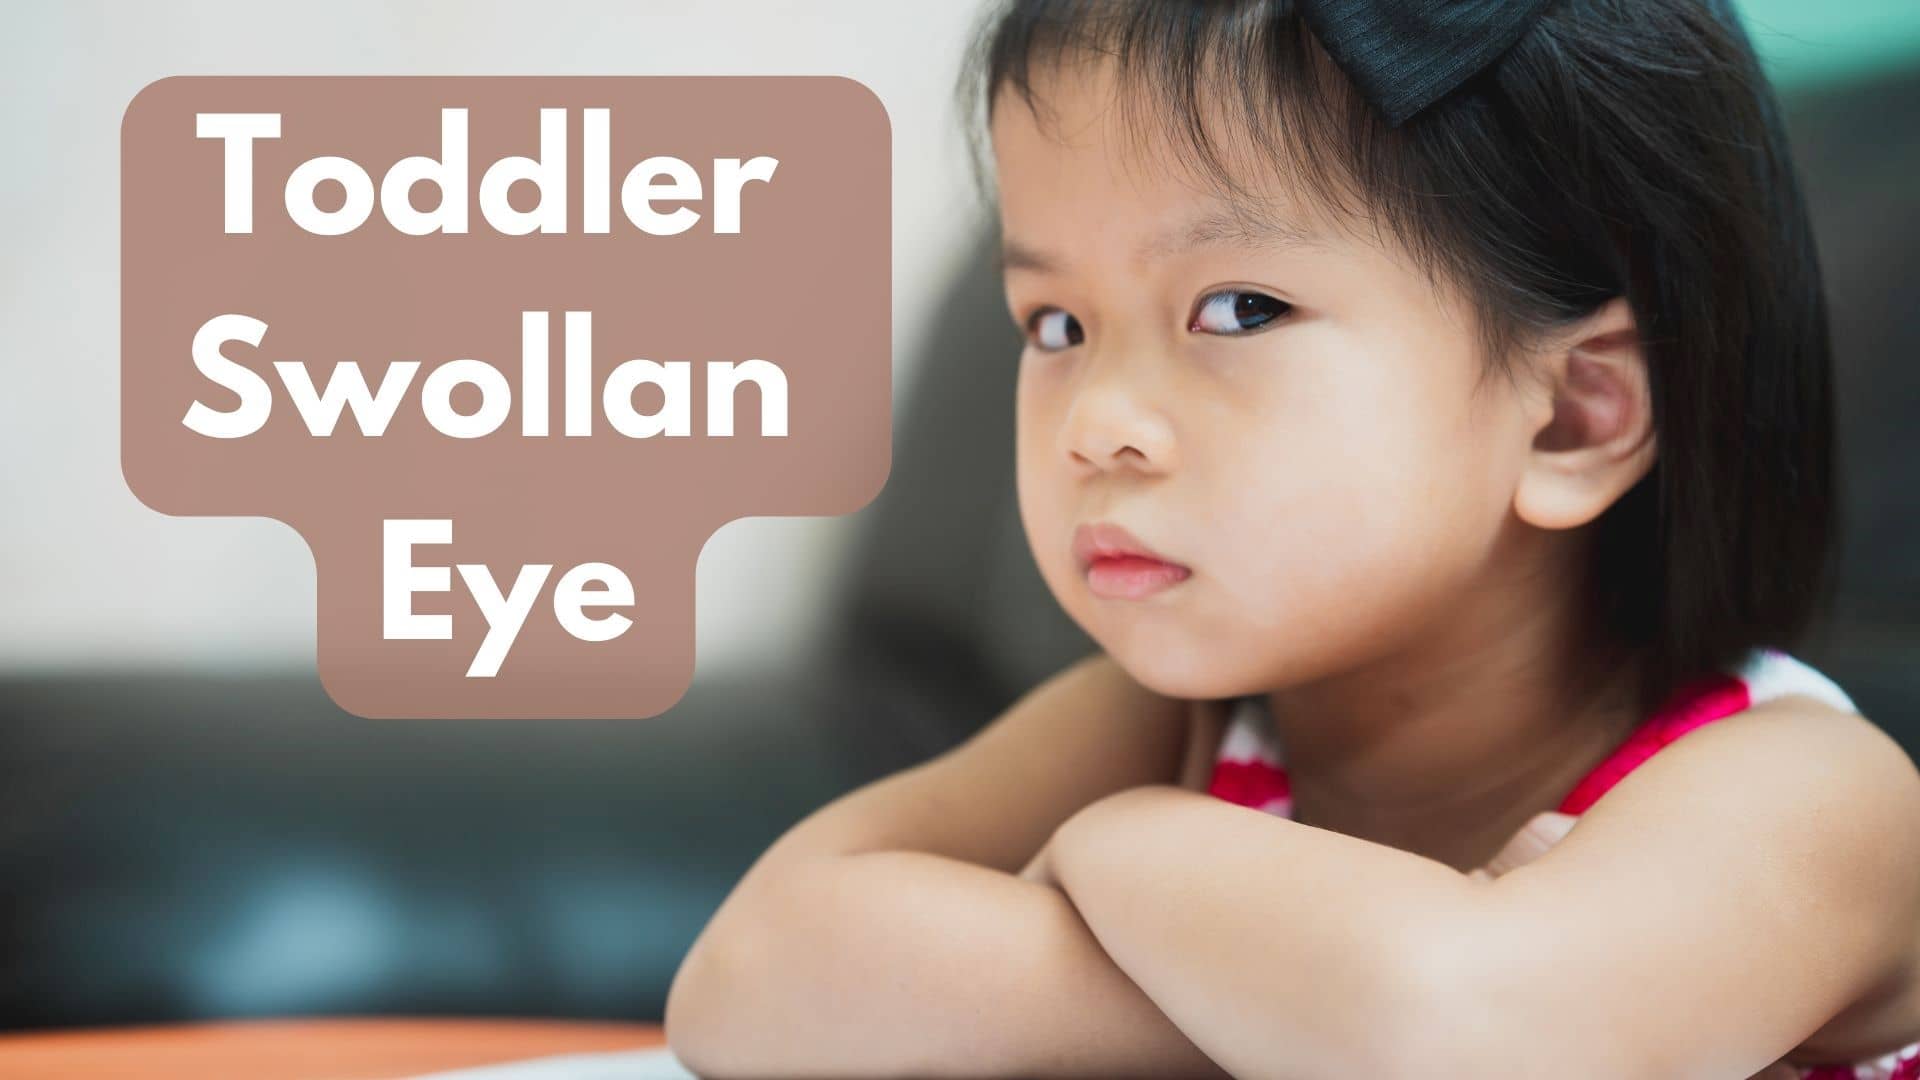 Why Did Your Toddler Woke Up With Swollan Eye